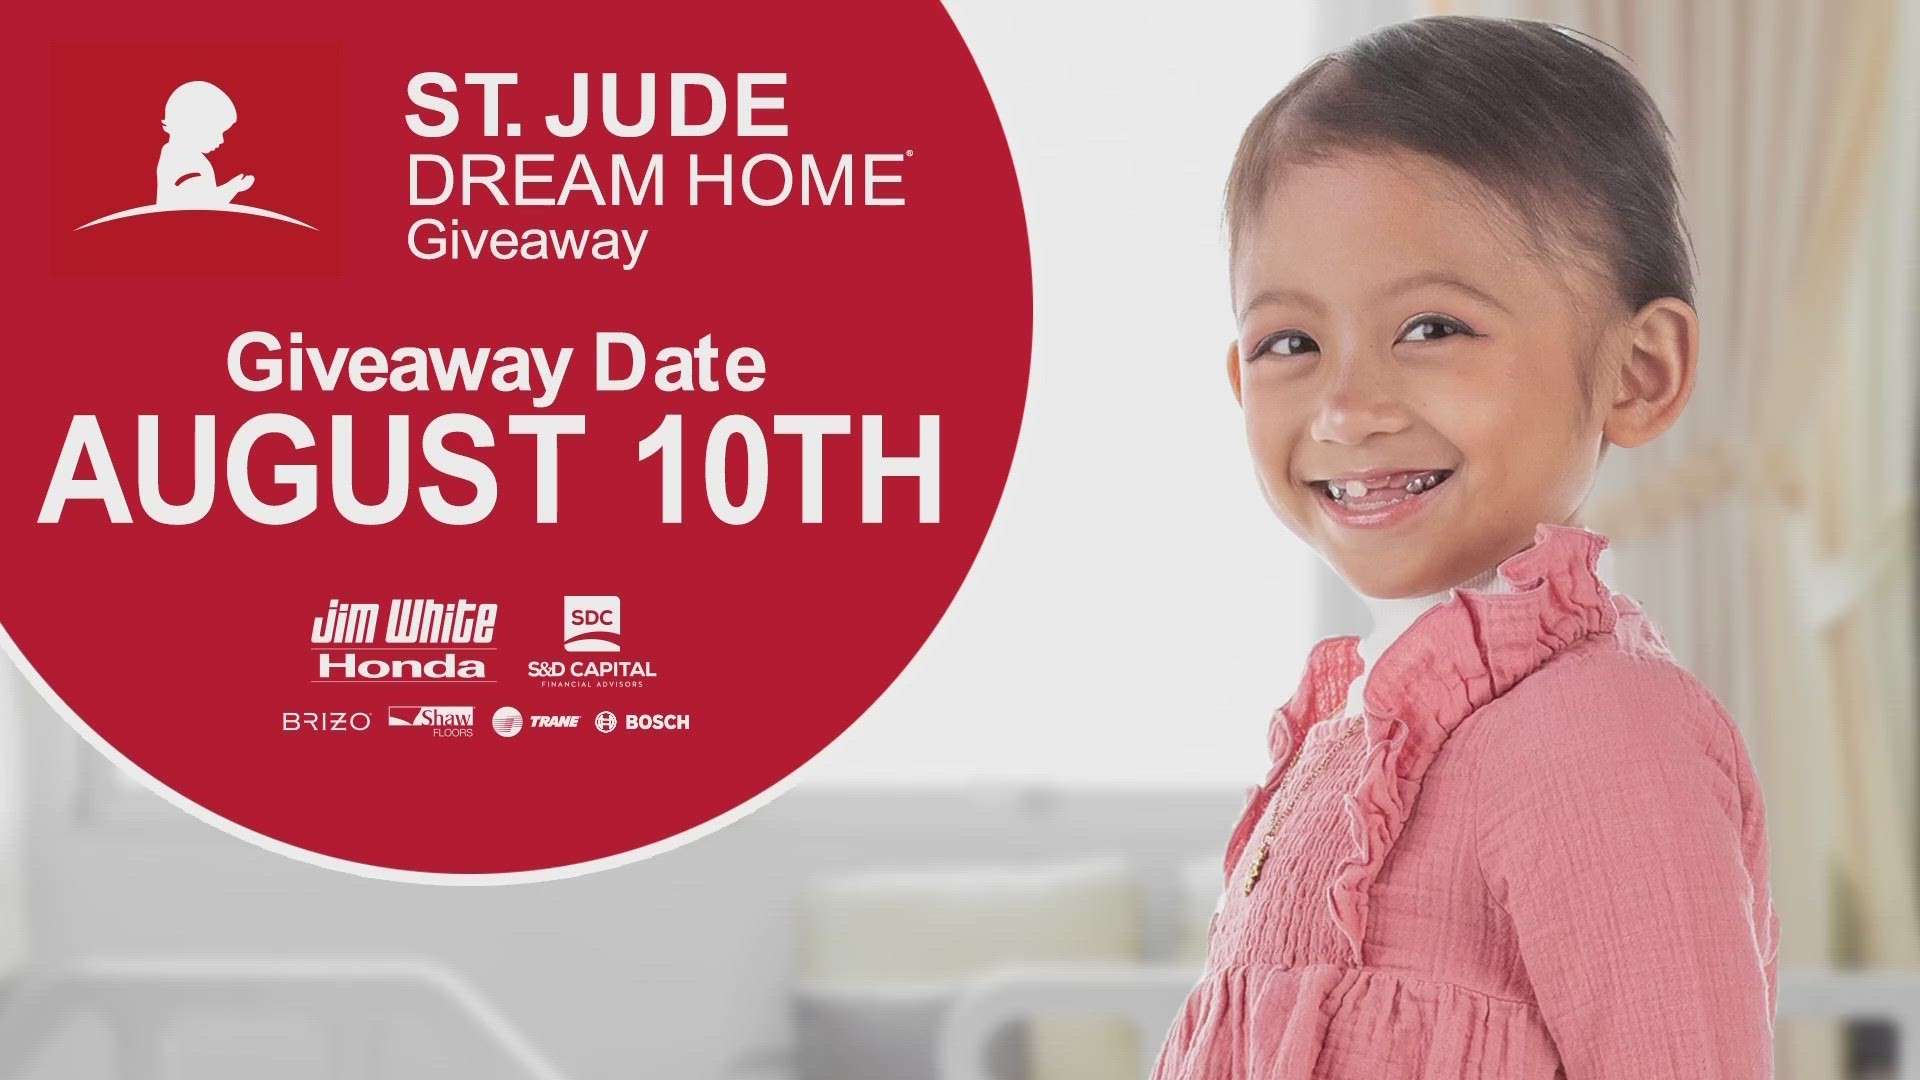 The St. Jude Dream is hosting Open House events on Saturday and Sunday. Attend to enter in for a chance to win a $10,000 Lazy Boy gift card.